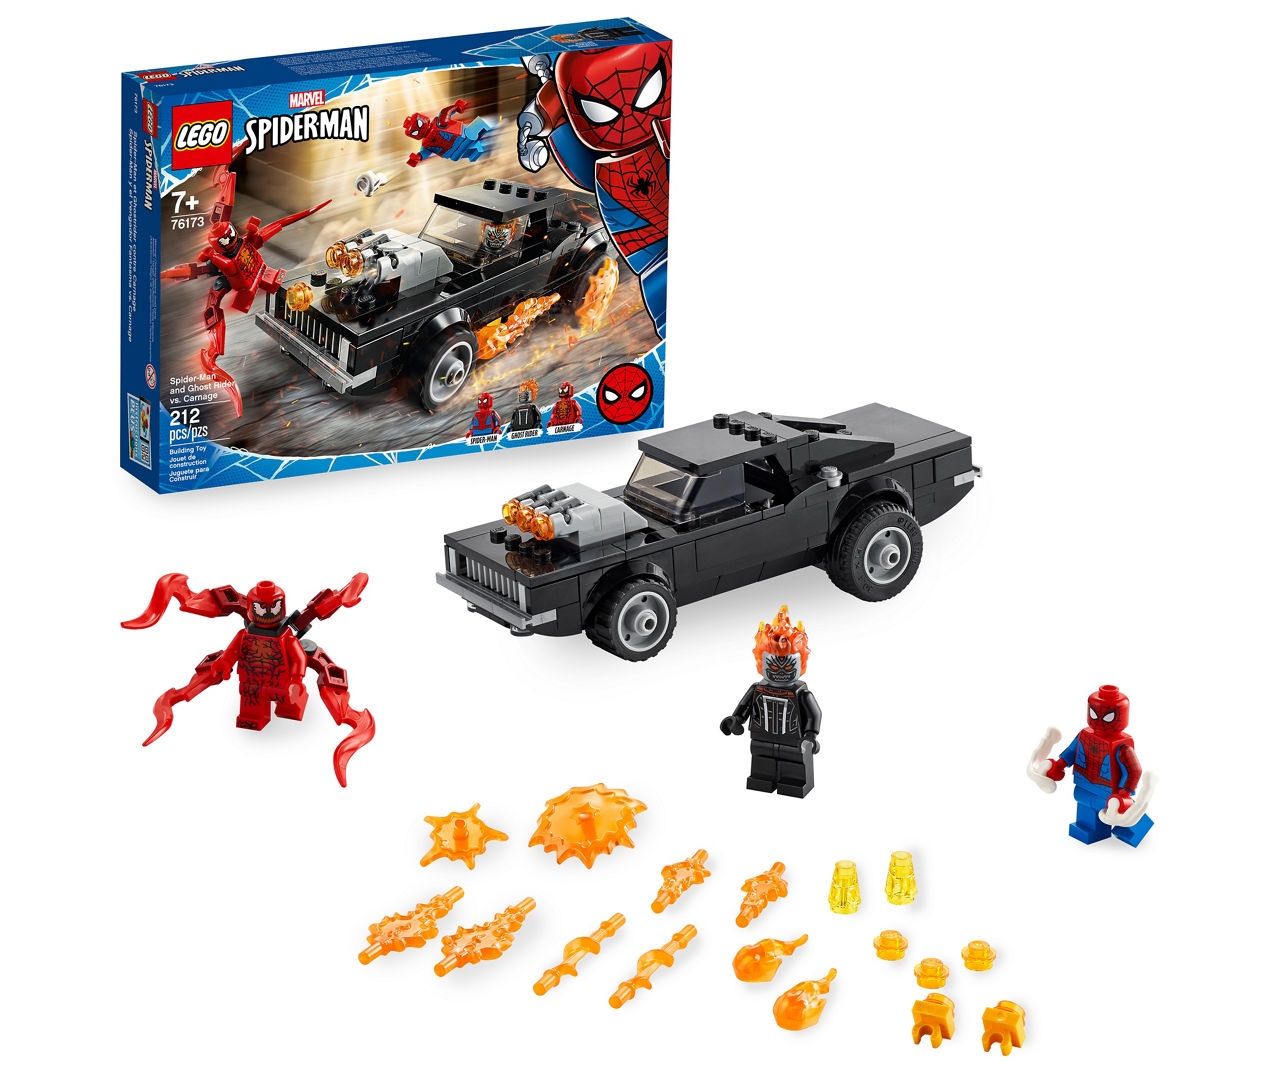 Marvel Avengers Super Heroes Spider-Man & Ghost Carnage 76173 212-Piece Building Toy | Big Lots